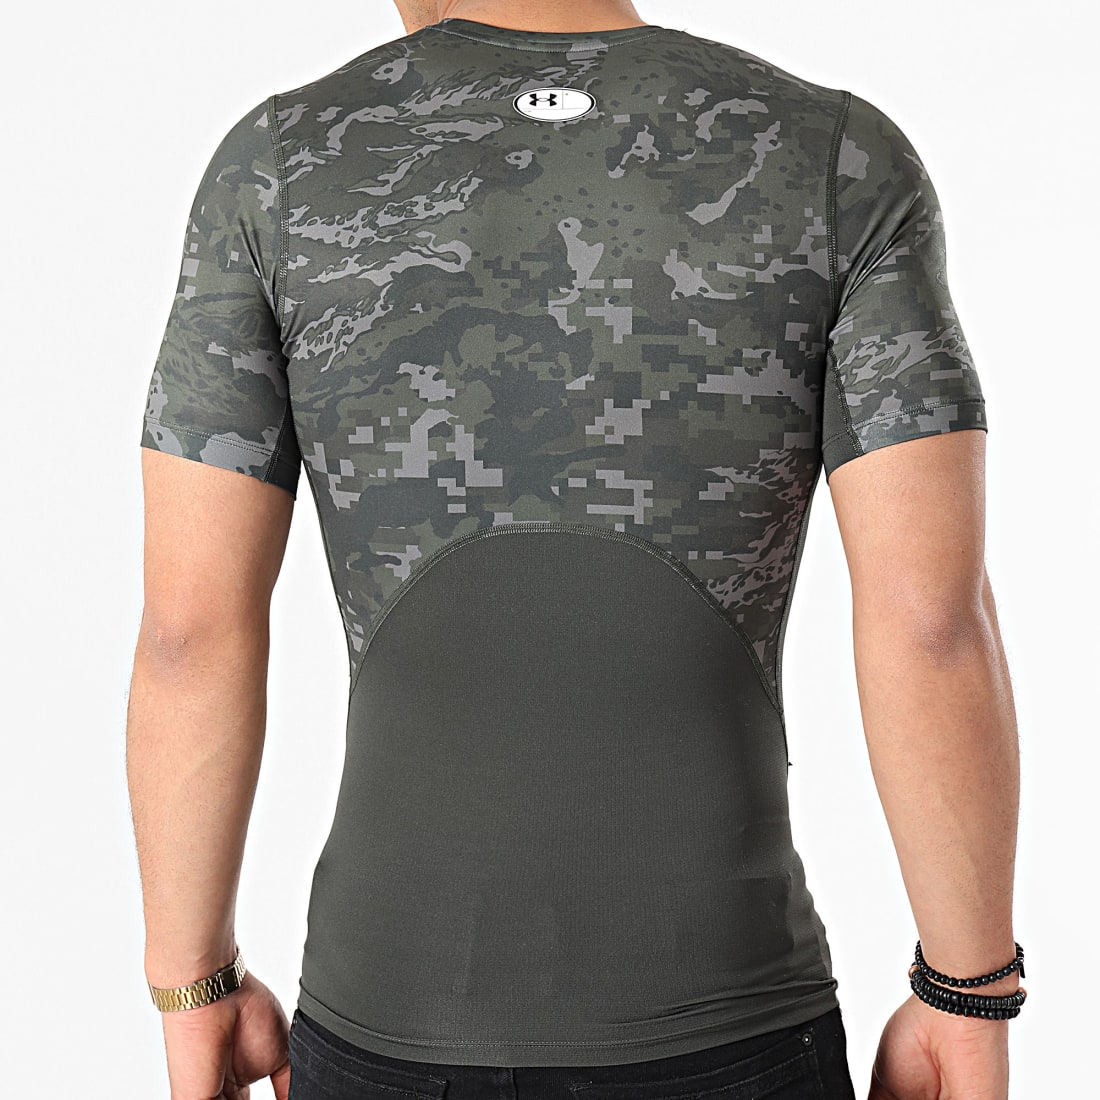 TSHIRT UNDER ARMOUR HOMME VERT CAMOUFLAGE - Univers Crampons